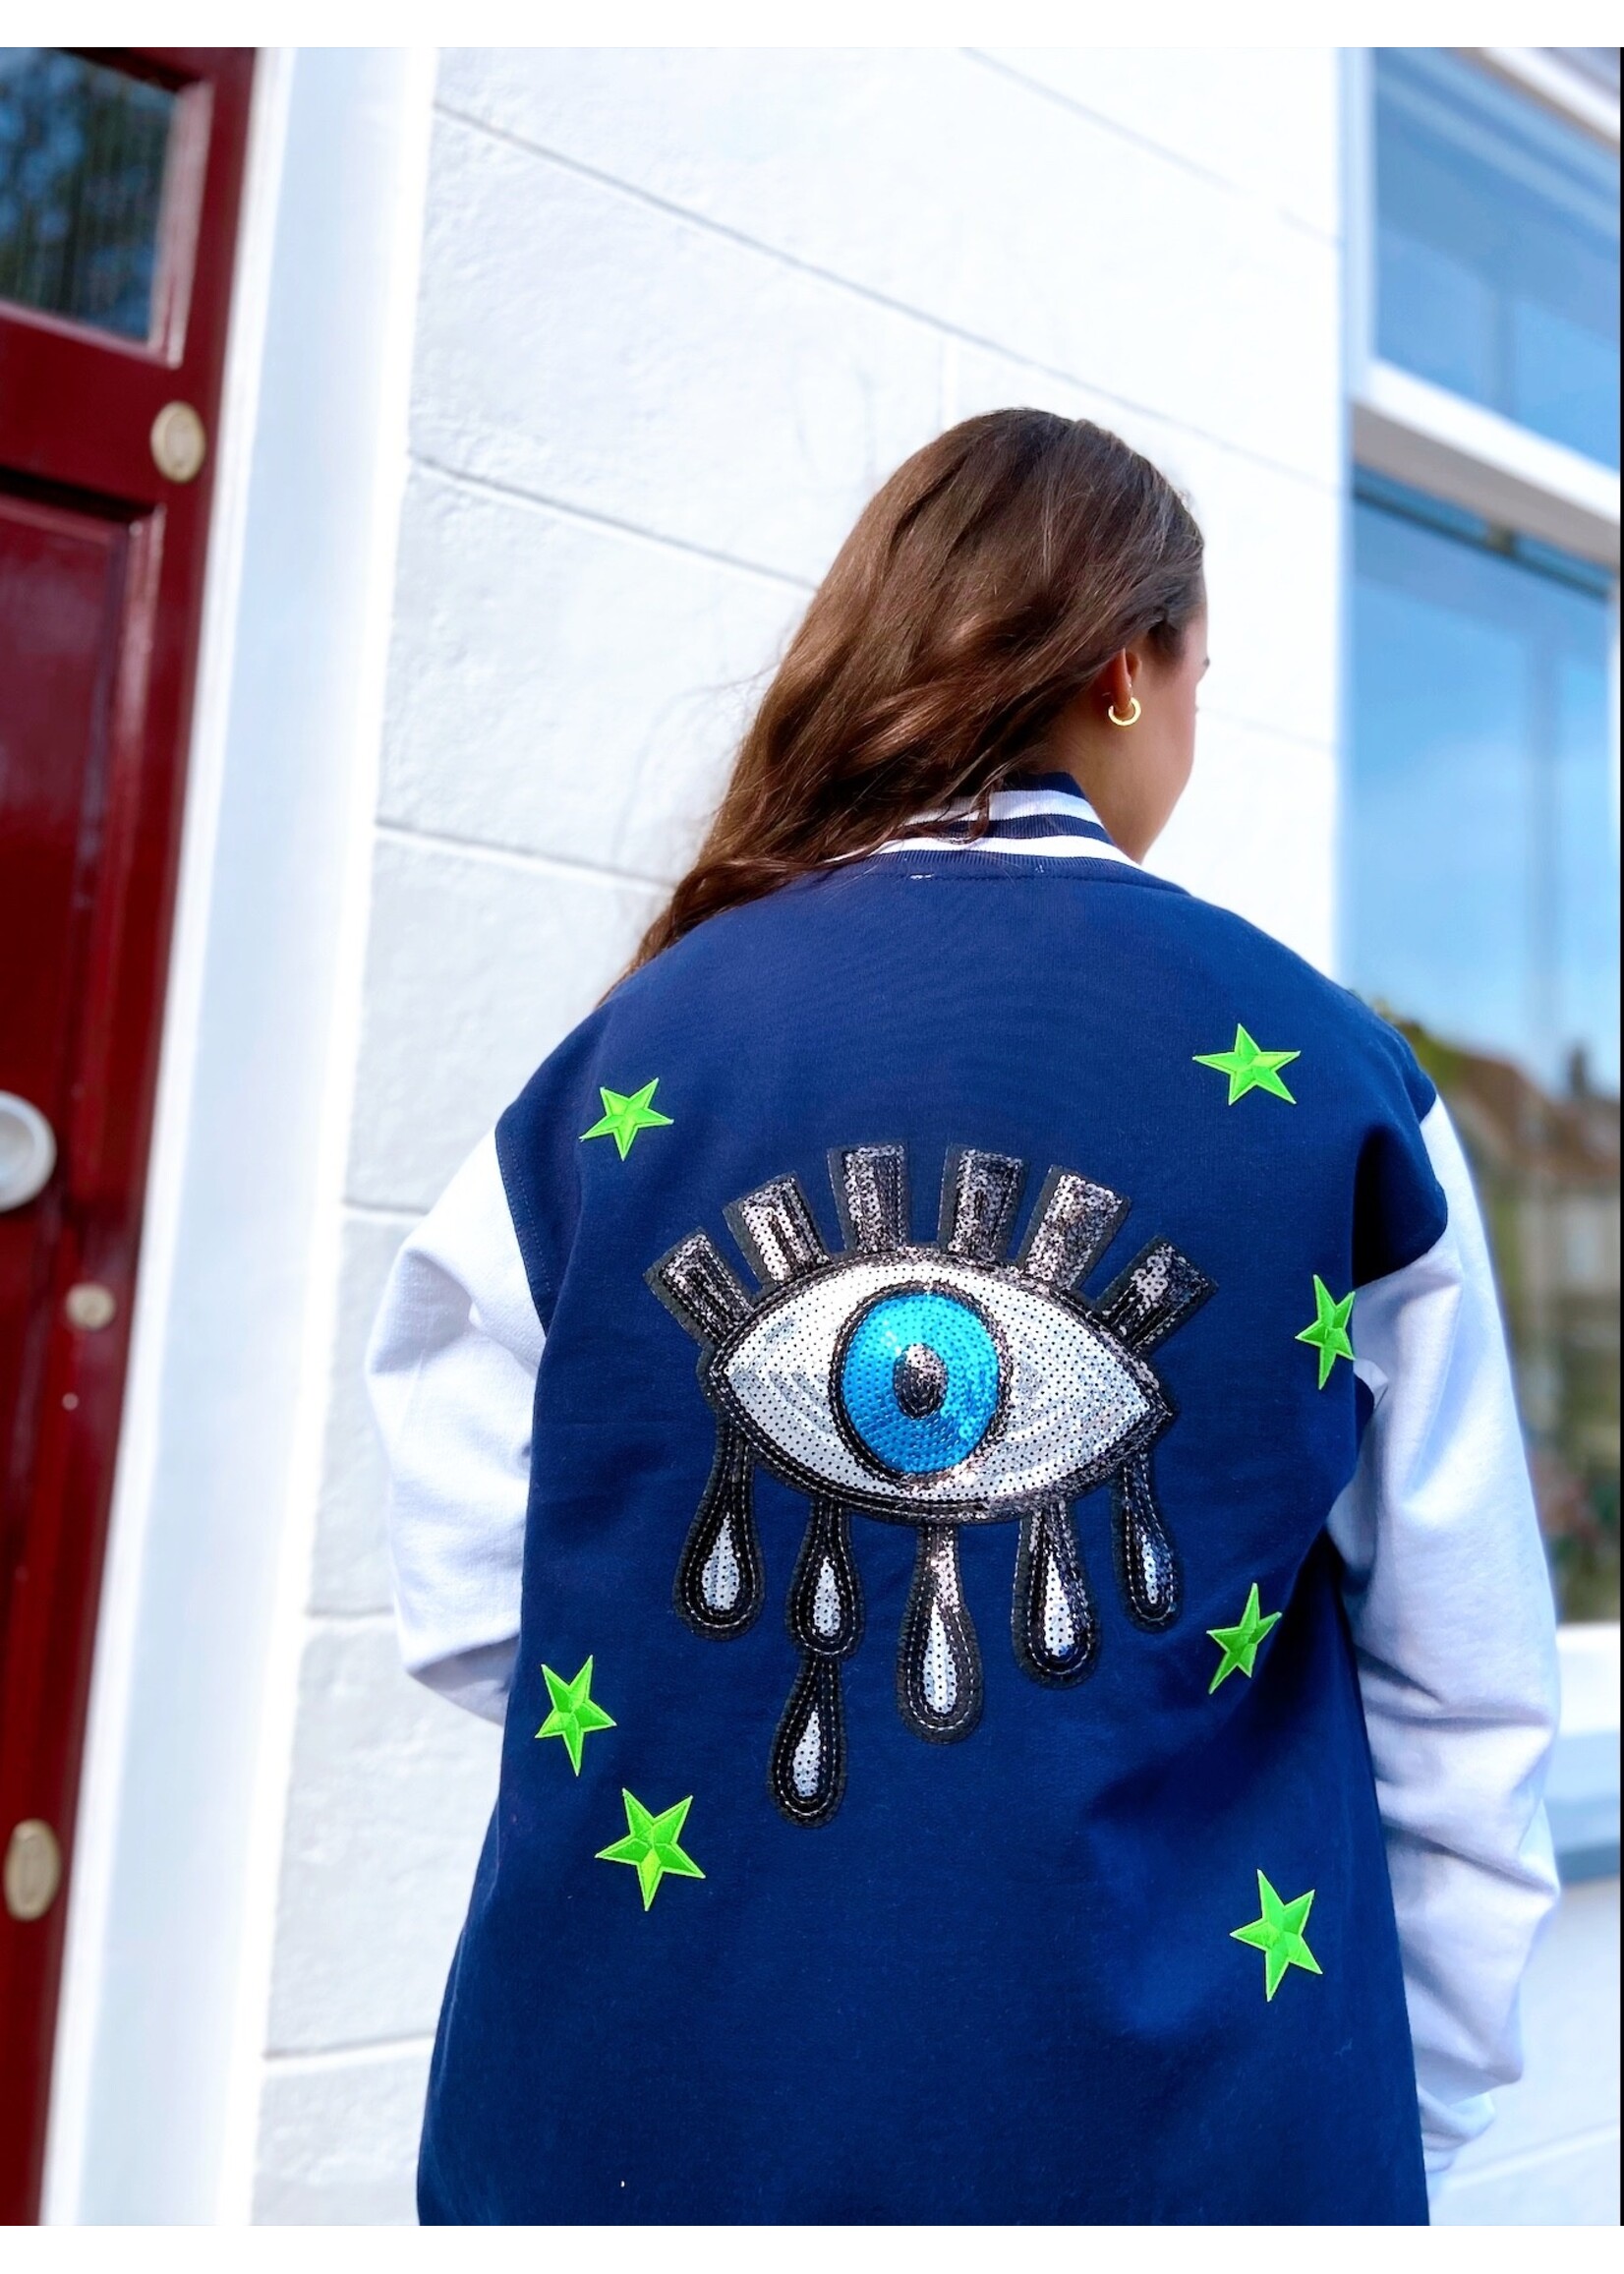 YOU ARE SPECIAL "Written In The Stars" Blue Baseball Jacket